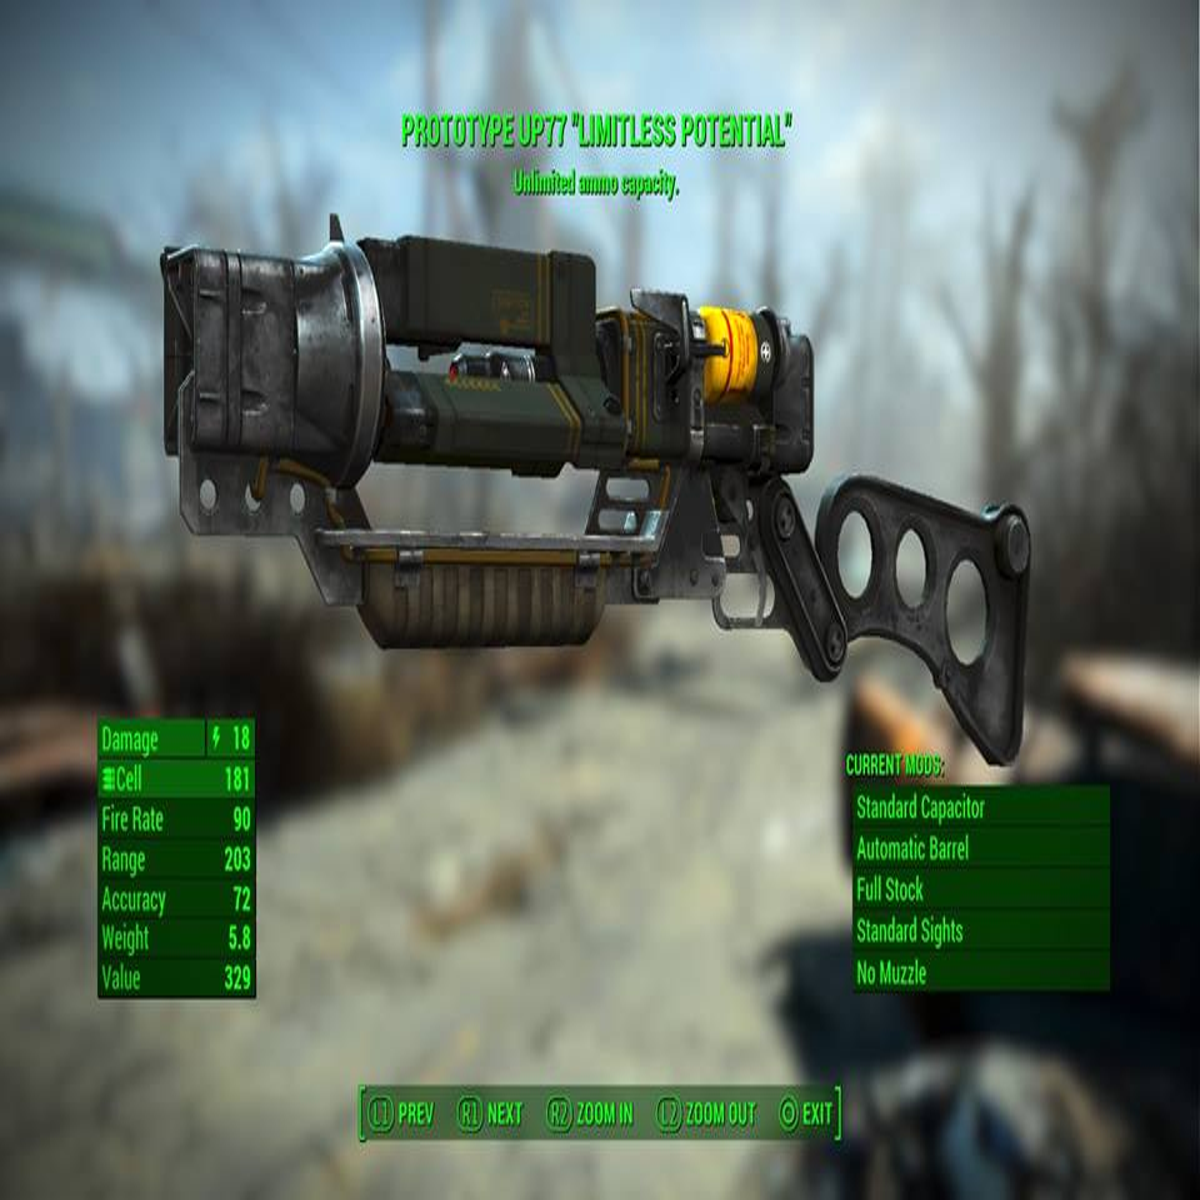 Fallout 3 Weapons and Ammo Codes (PC)